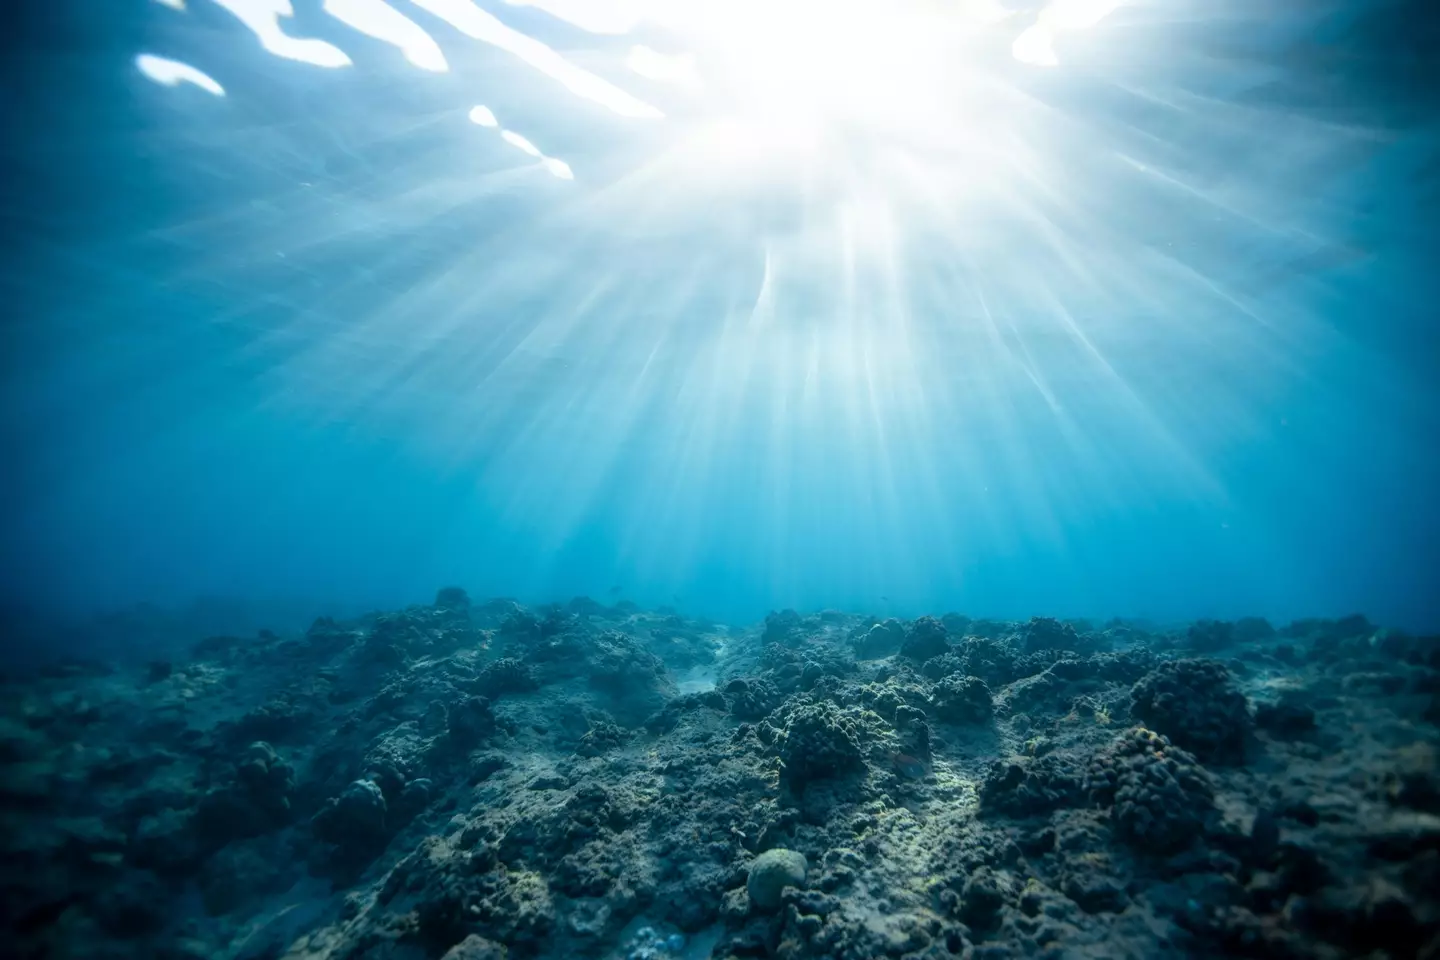 Going too deep underwater can be fatal for humans. (Jeremy Bishop/Pexels)